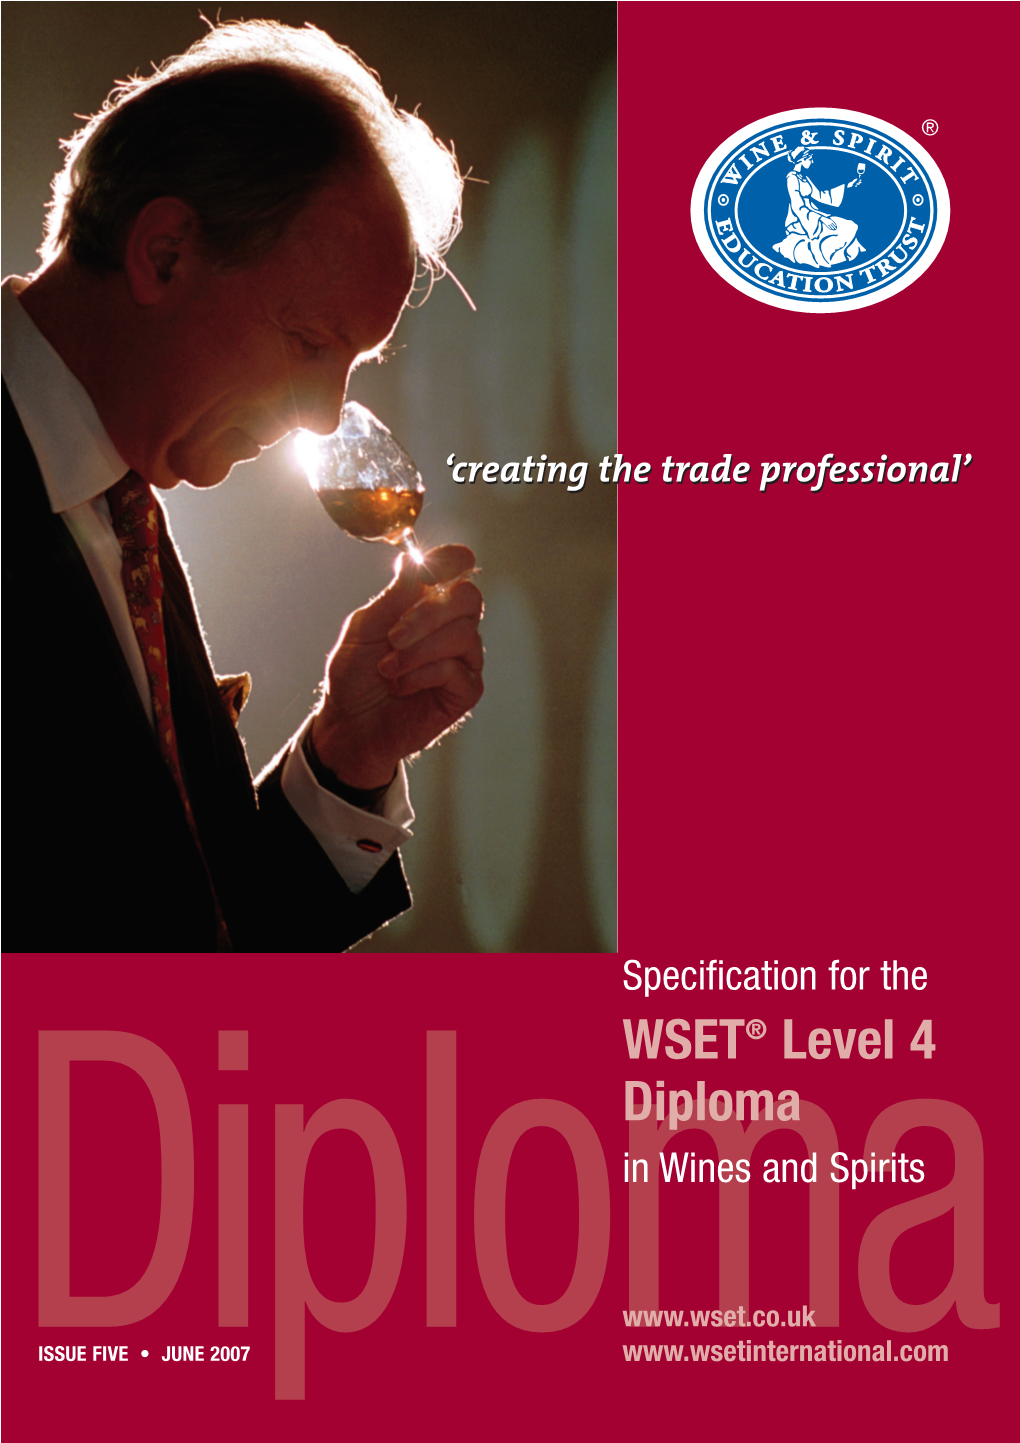 WSET® Level 4 Diploma in Wines and Spirits